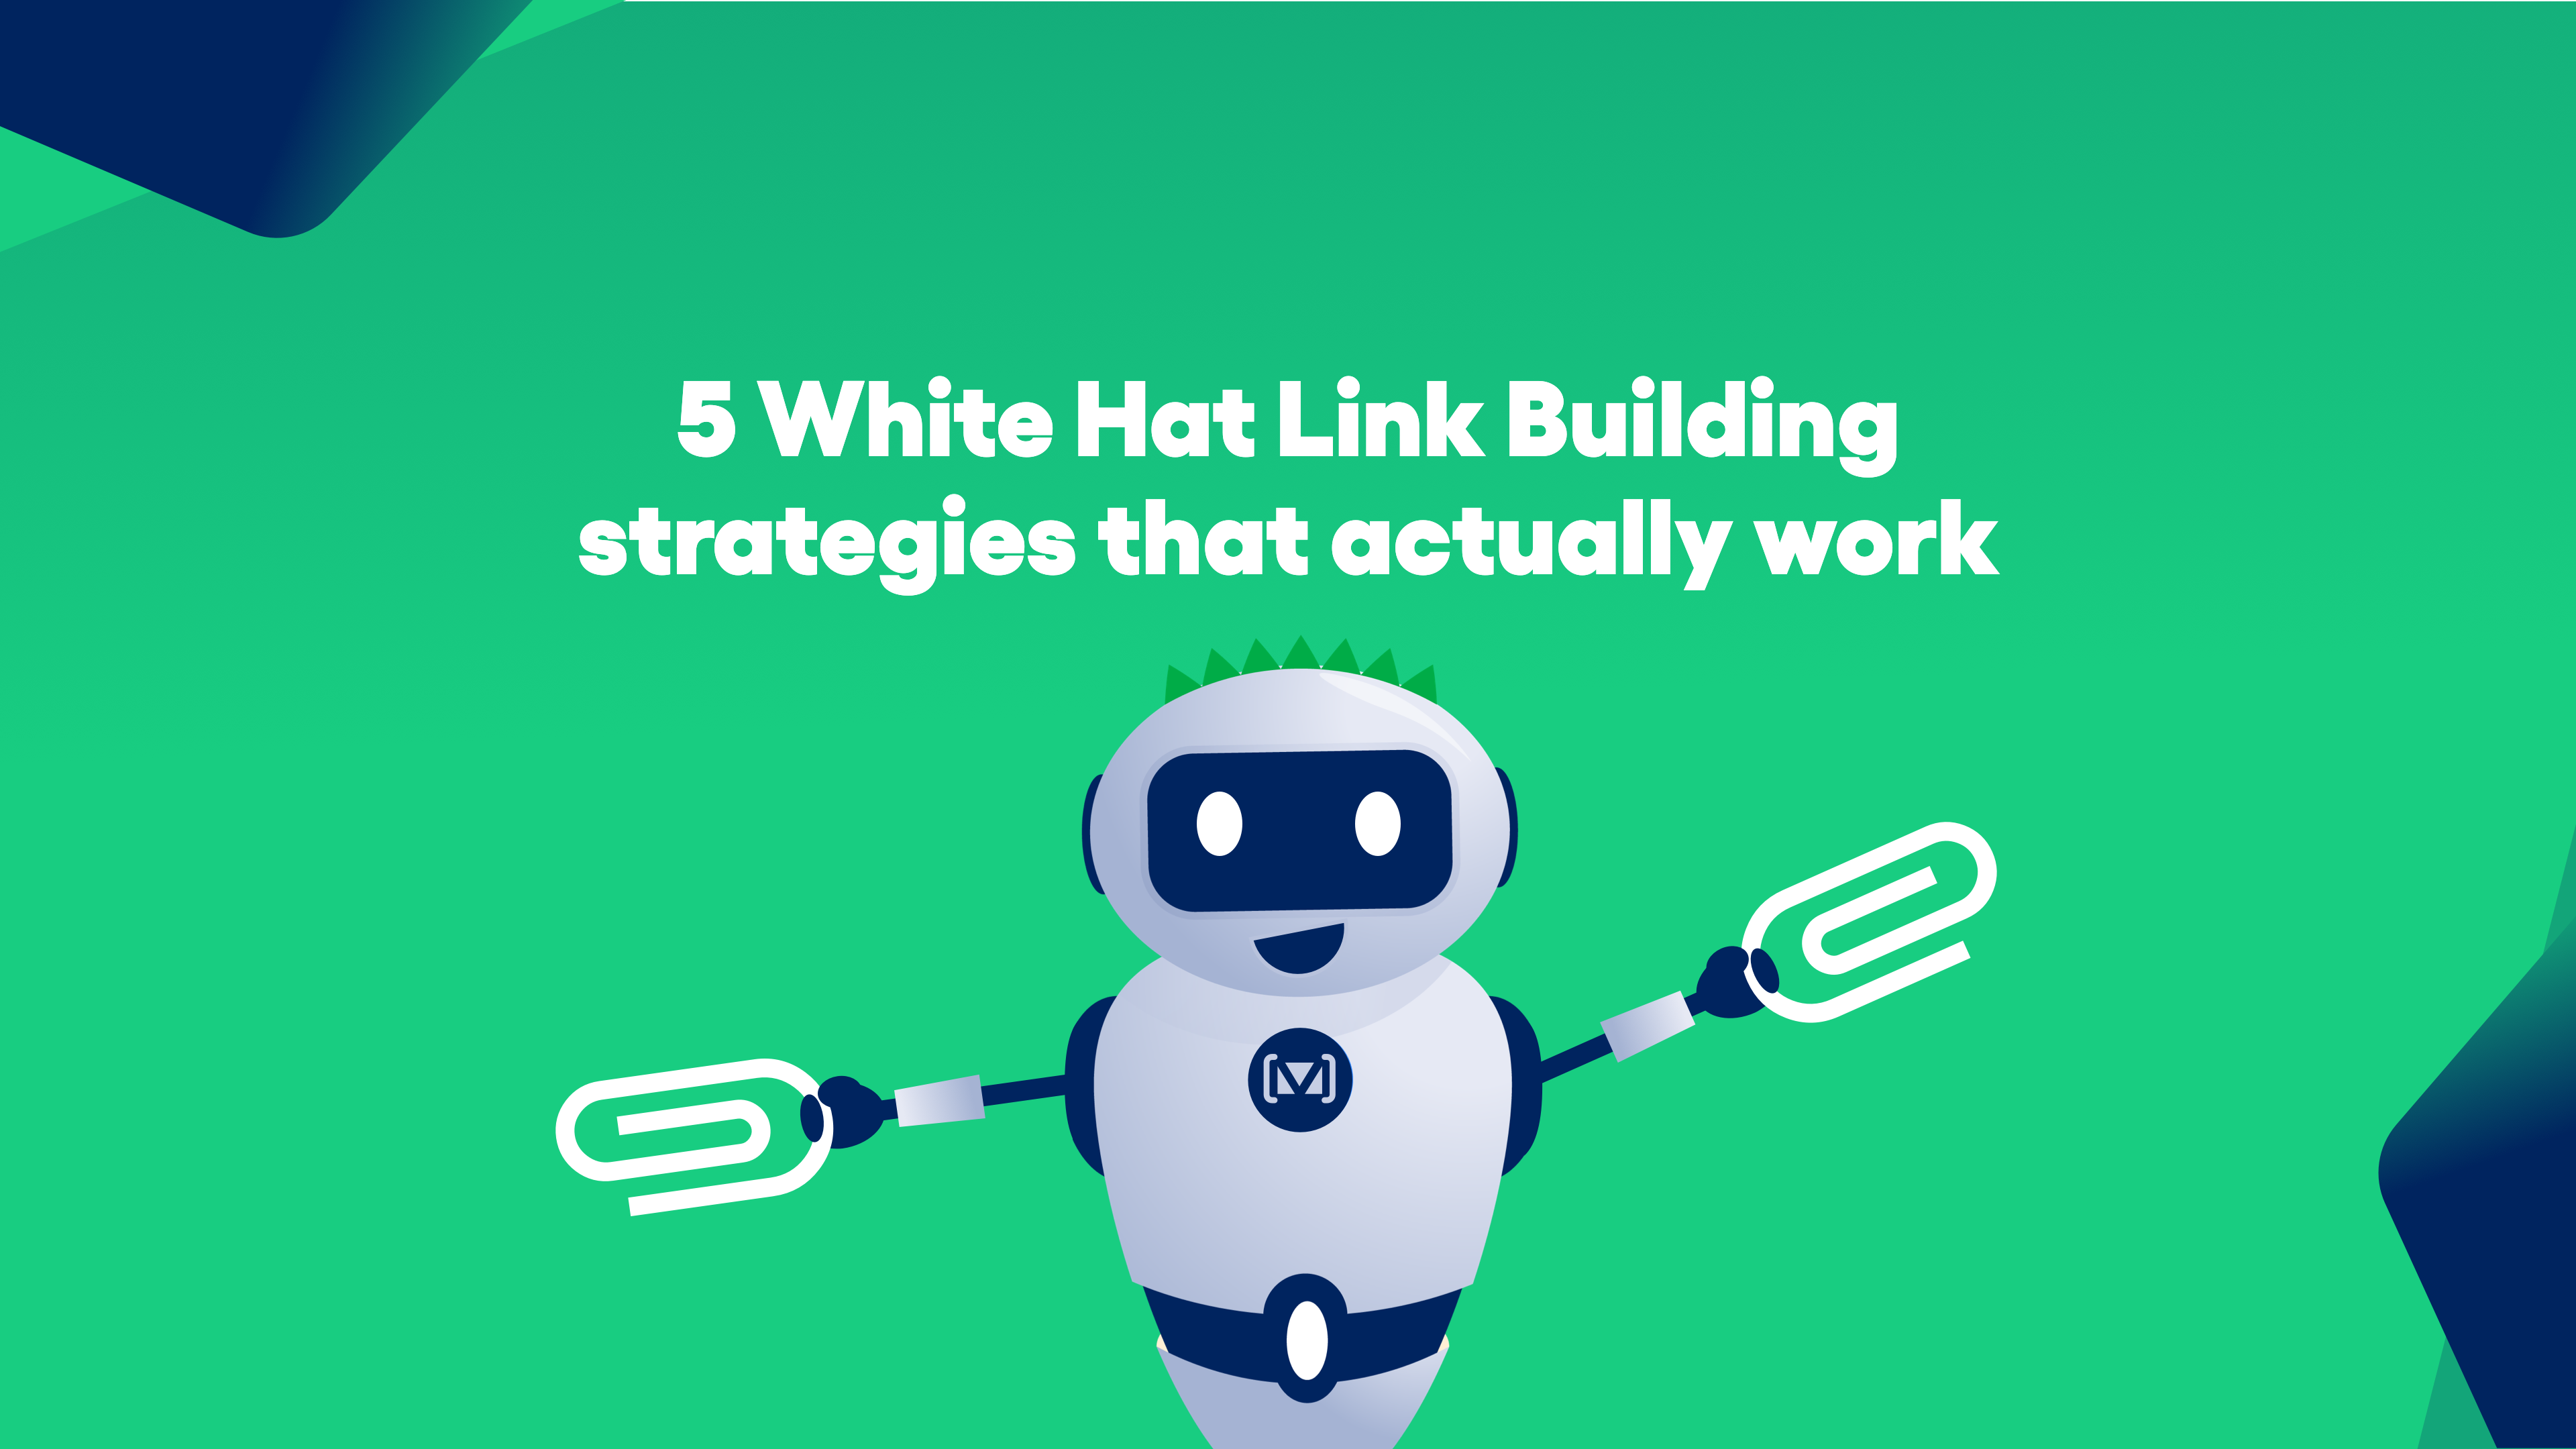 White Hat Link Building for Agencies - The Ultimate Hack